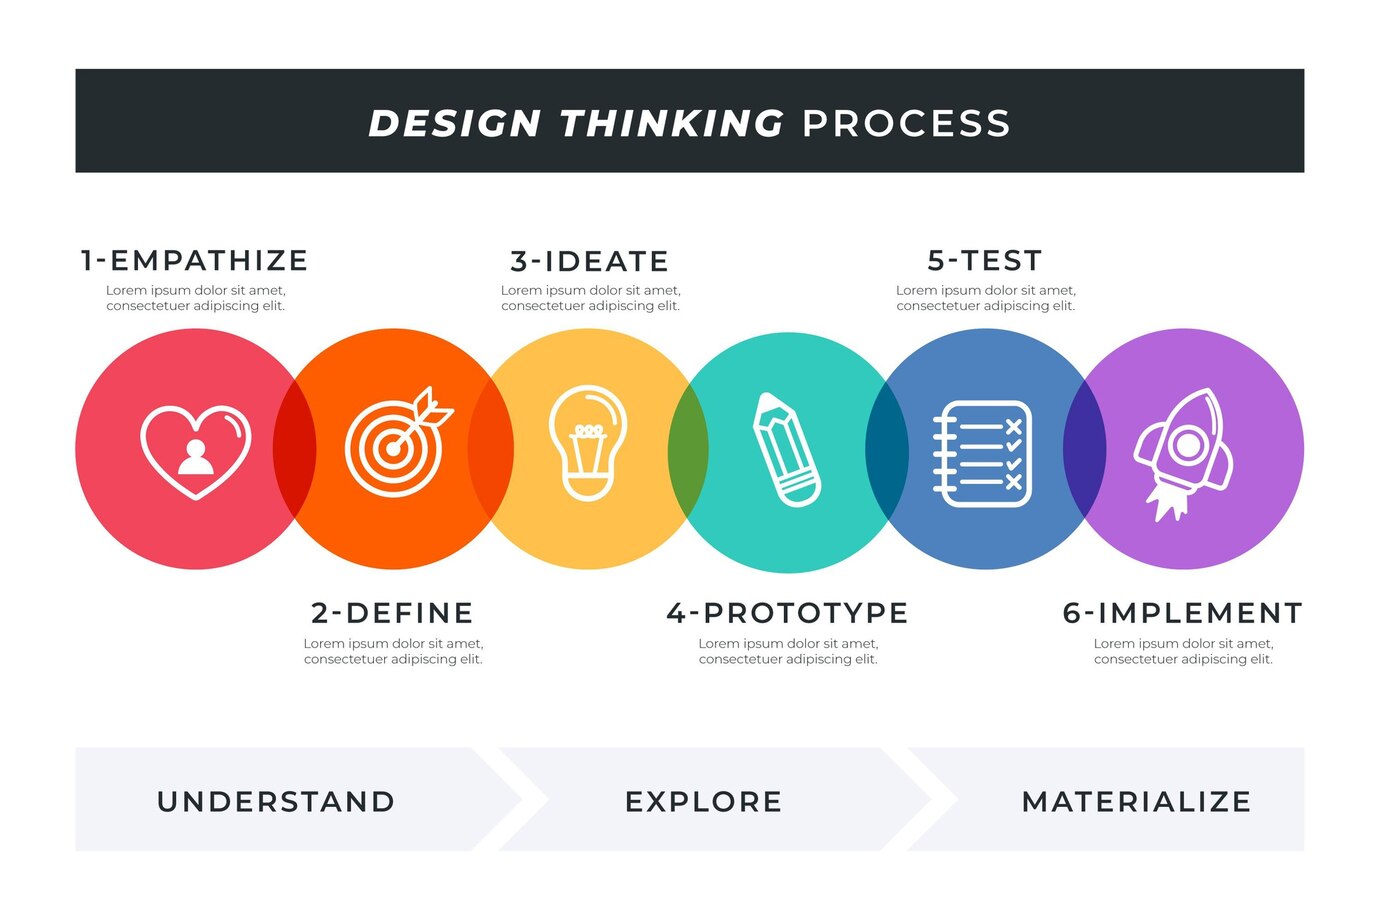 Design Thinking: A Creative Approach to Problem Solving